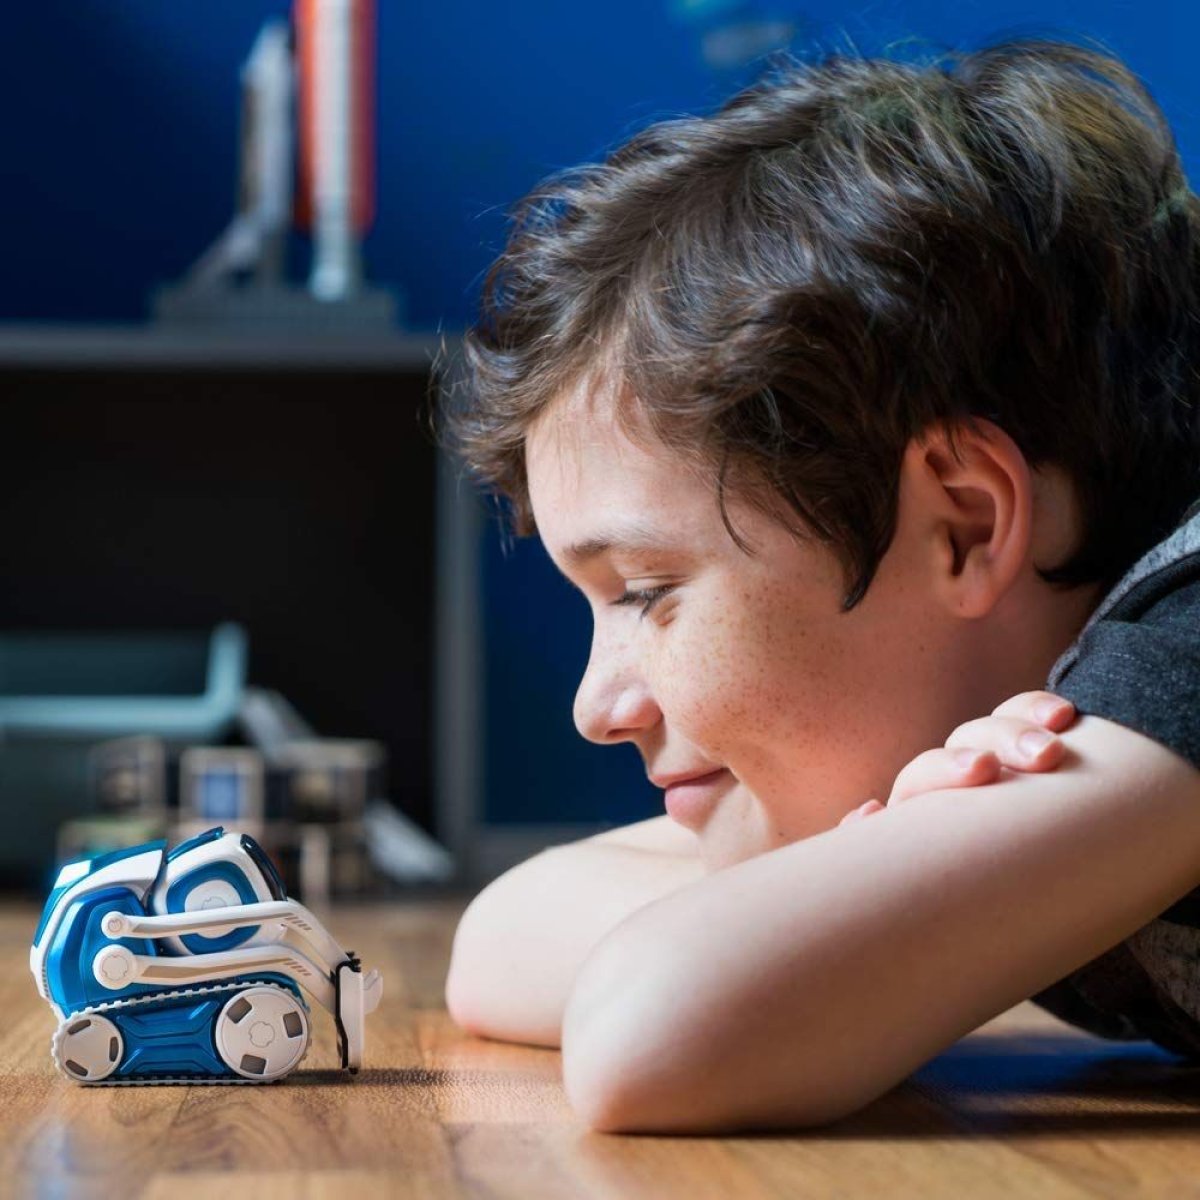 7 Cyber Monday - Anki Cozmo Limited Edition, Interstellar Blue, A Fun, Educational Toy Robot for Kids